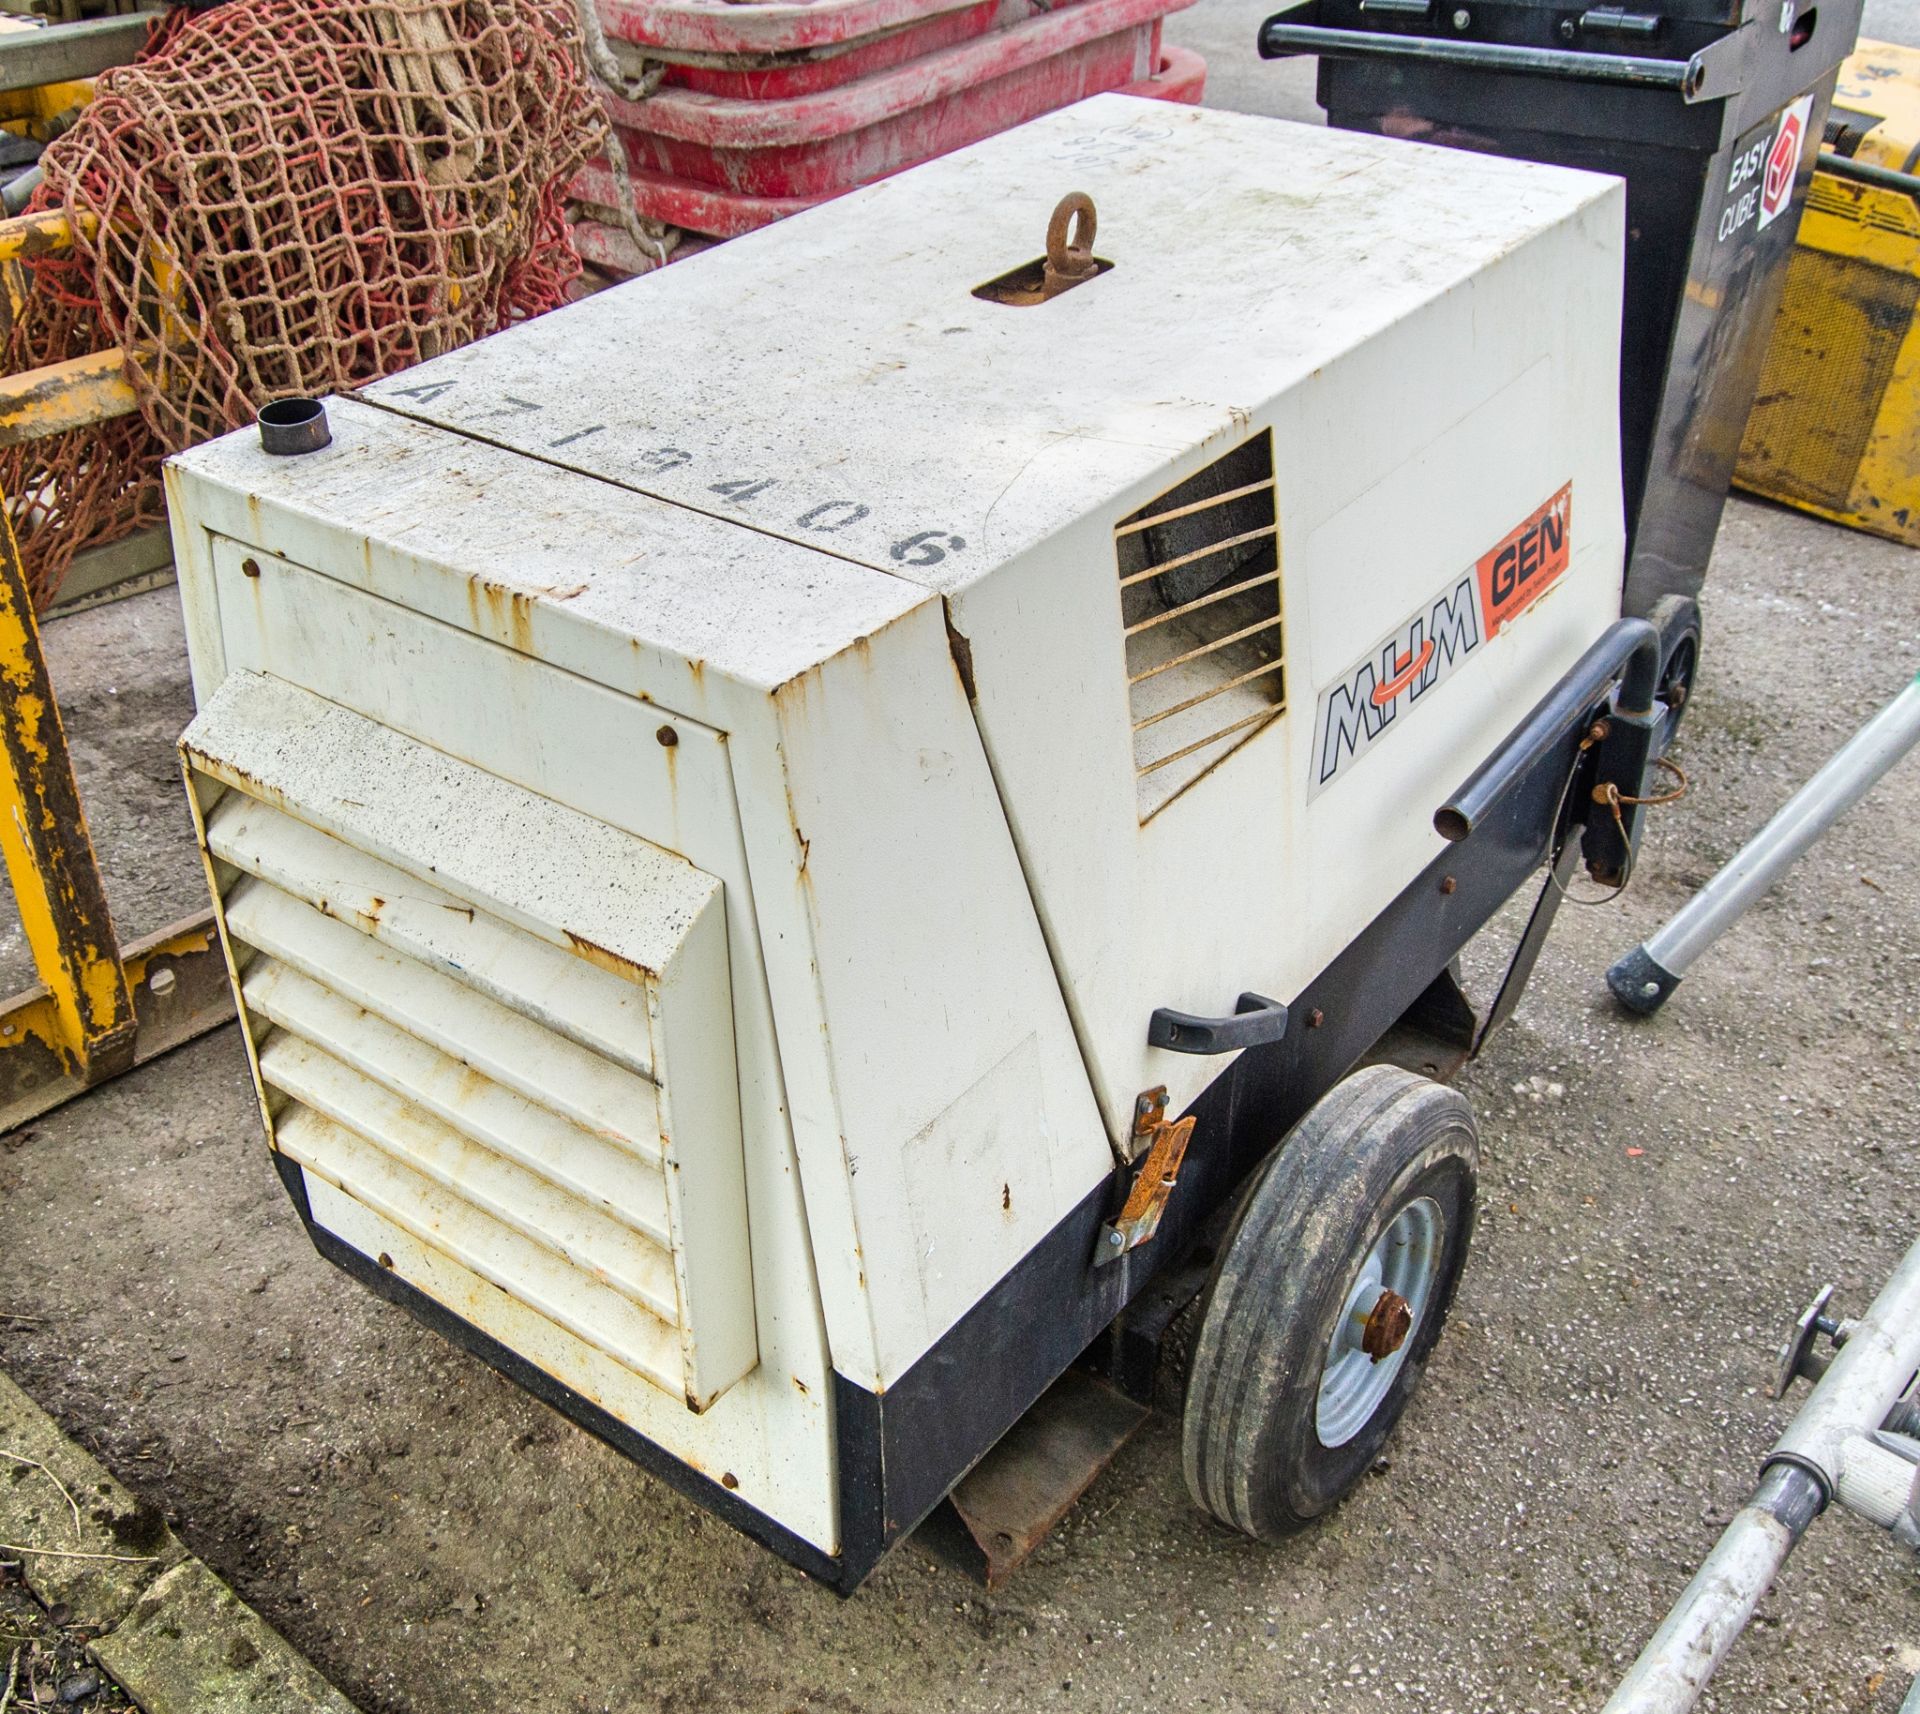 MHM MG1000 SSK-V 10 kva diesel driven generator S/N: 229150127 Recorded hours: 1867 A719406 - Image 2 of 4